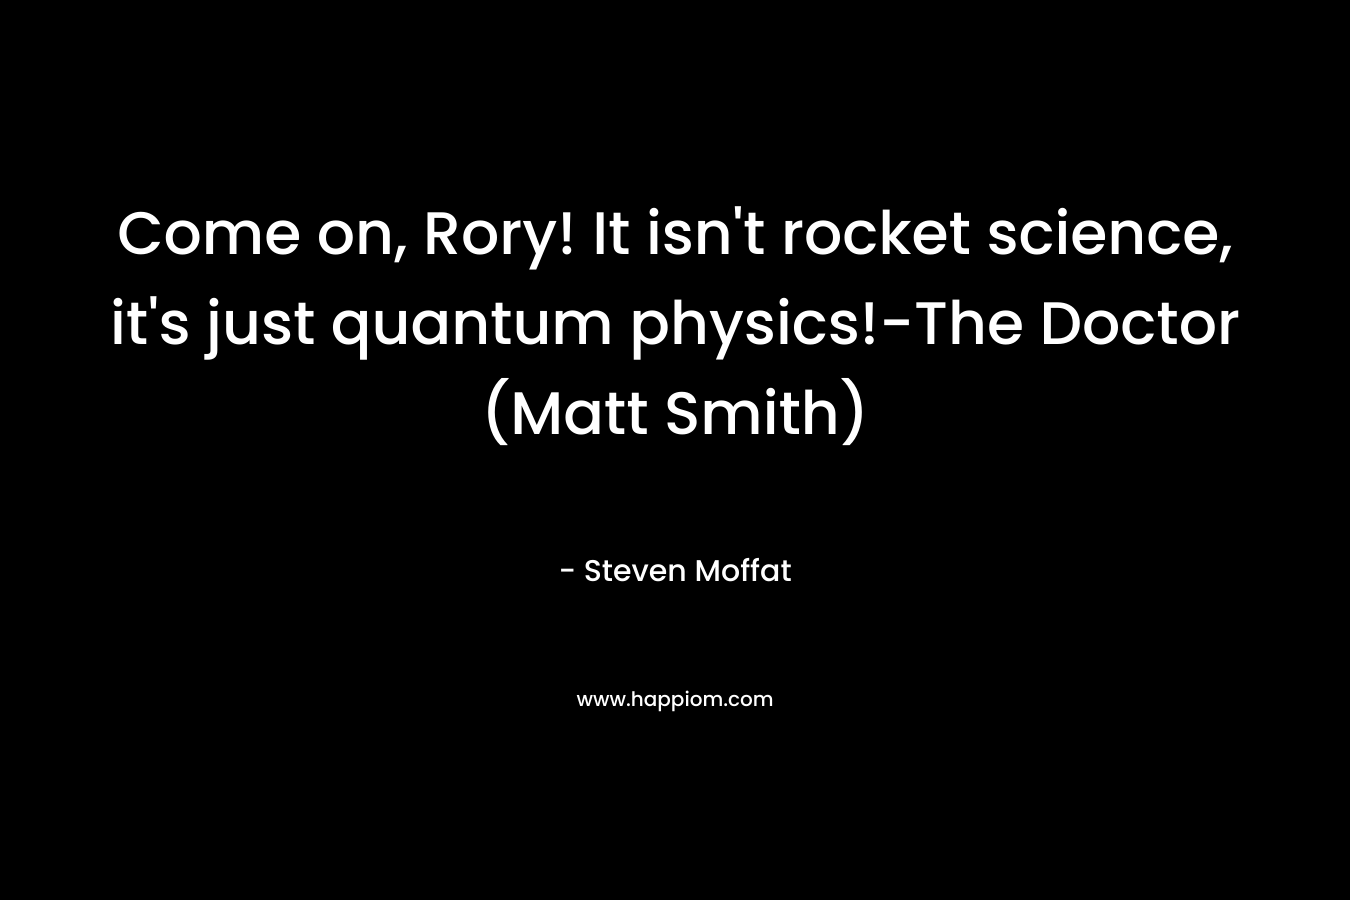 Come on, Rory! It isn’t rocket science, it’s just quantum physics!-The Doctor (Matt Smith) – Steven Moffat